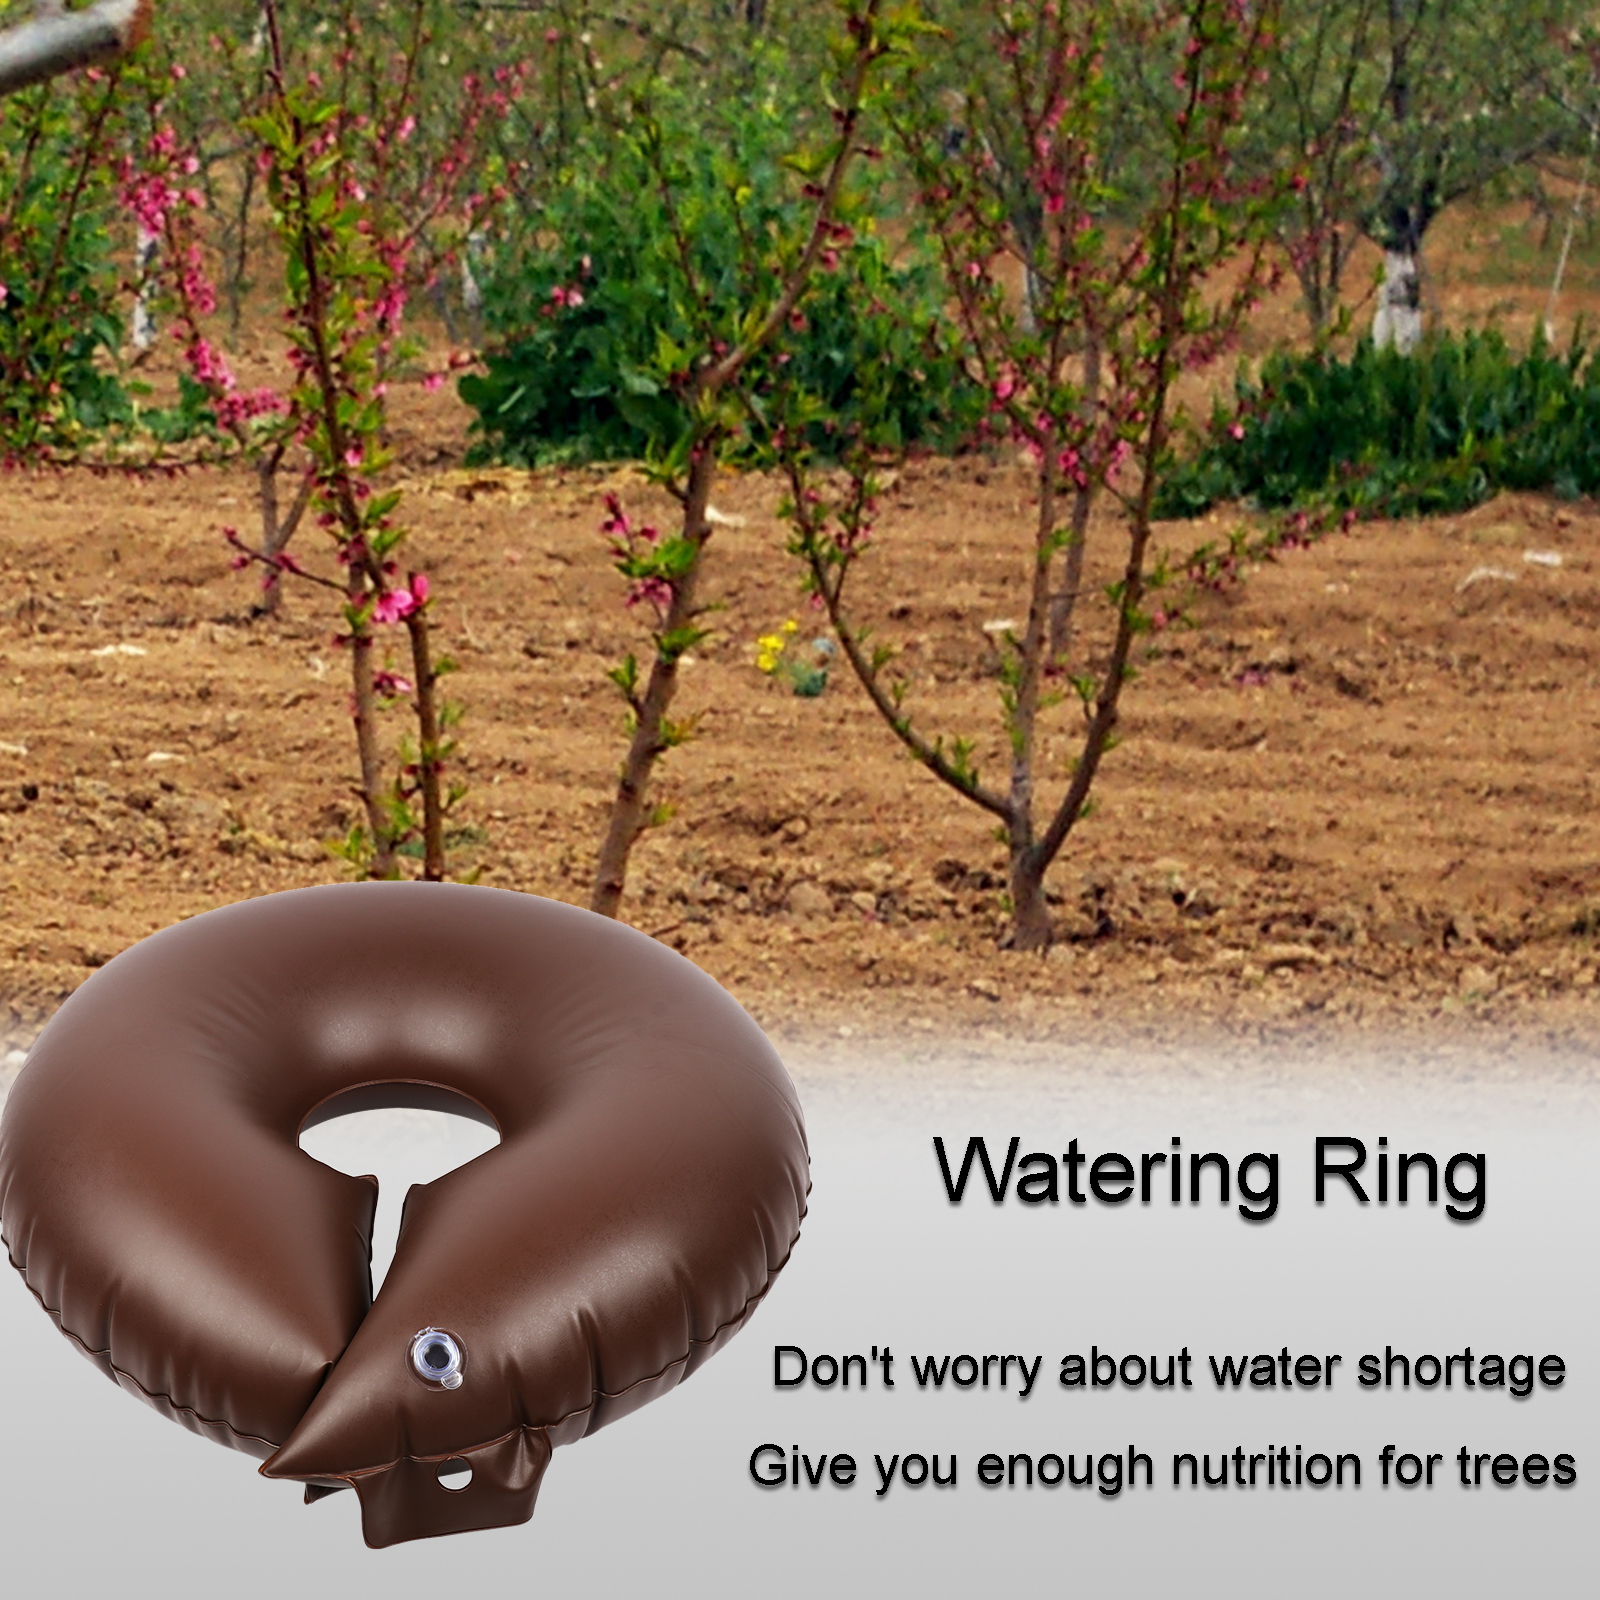 Irrigation System Drip Water Pouch Tree Watering Bag Slow Release Bag High Capacity Automatic 15/20/30 Gallons Gardening Tool Watering Ring